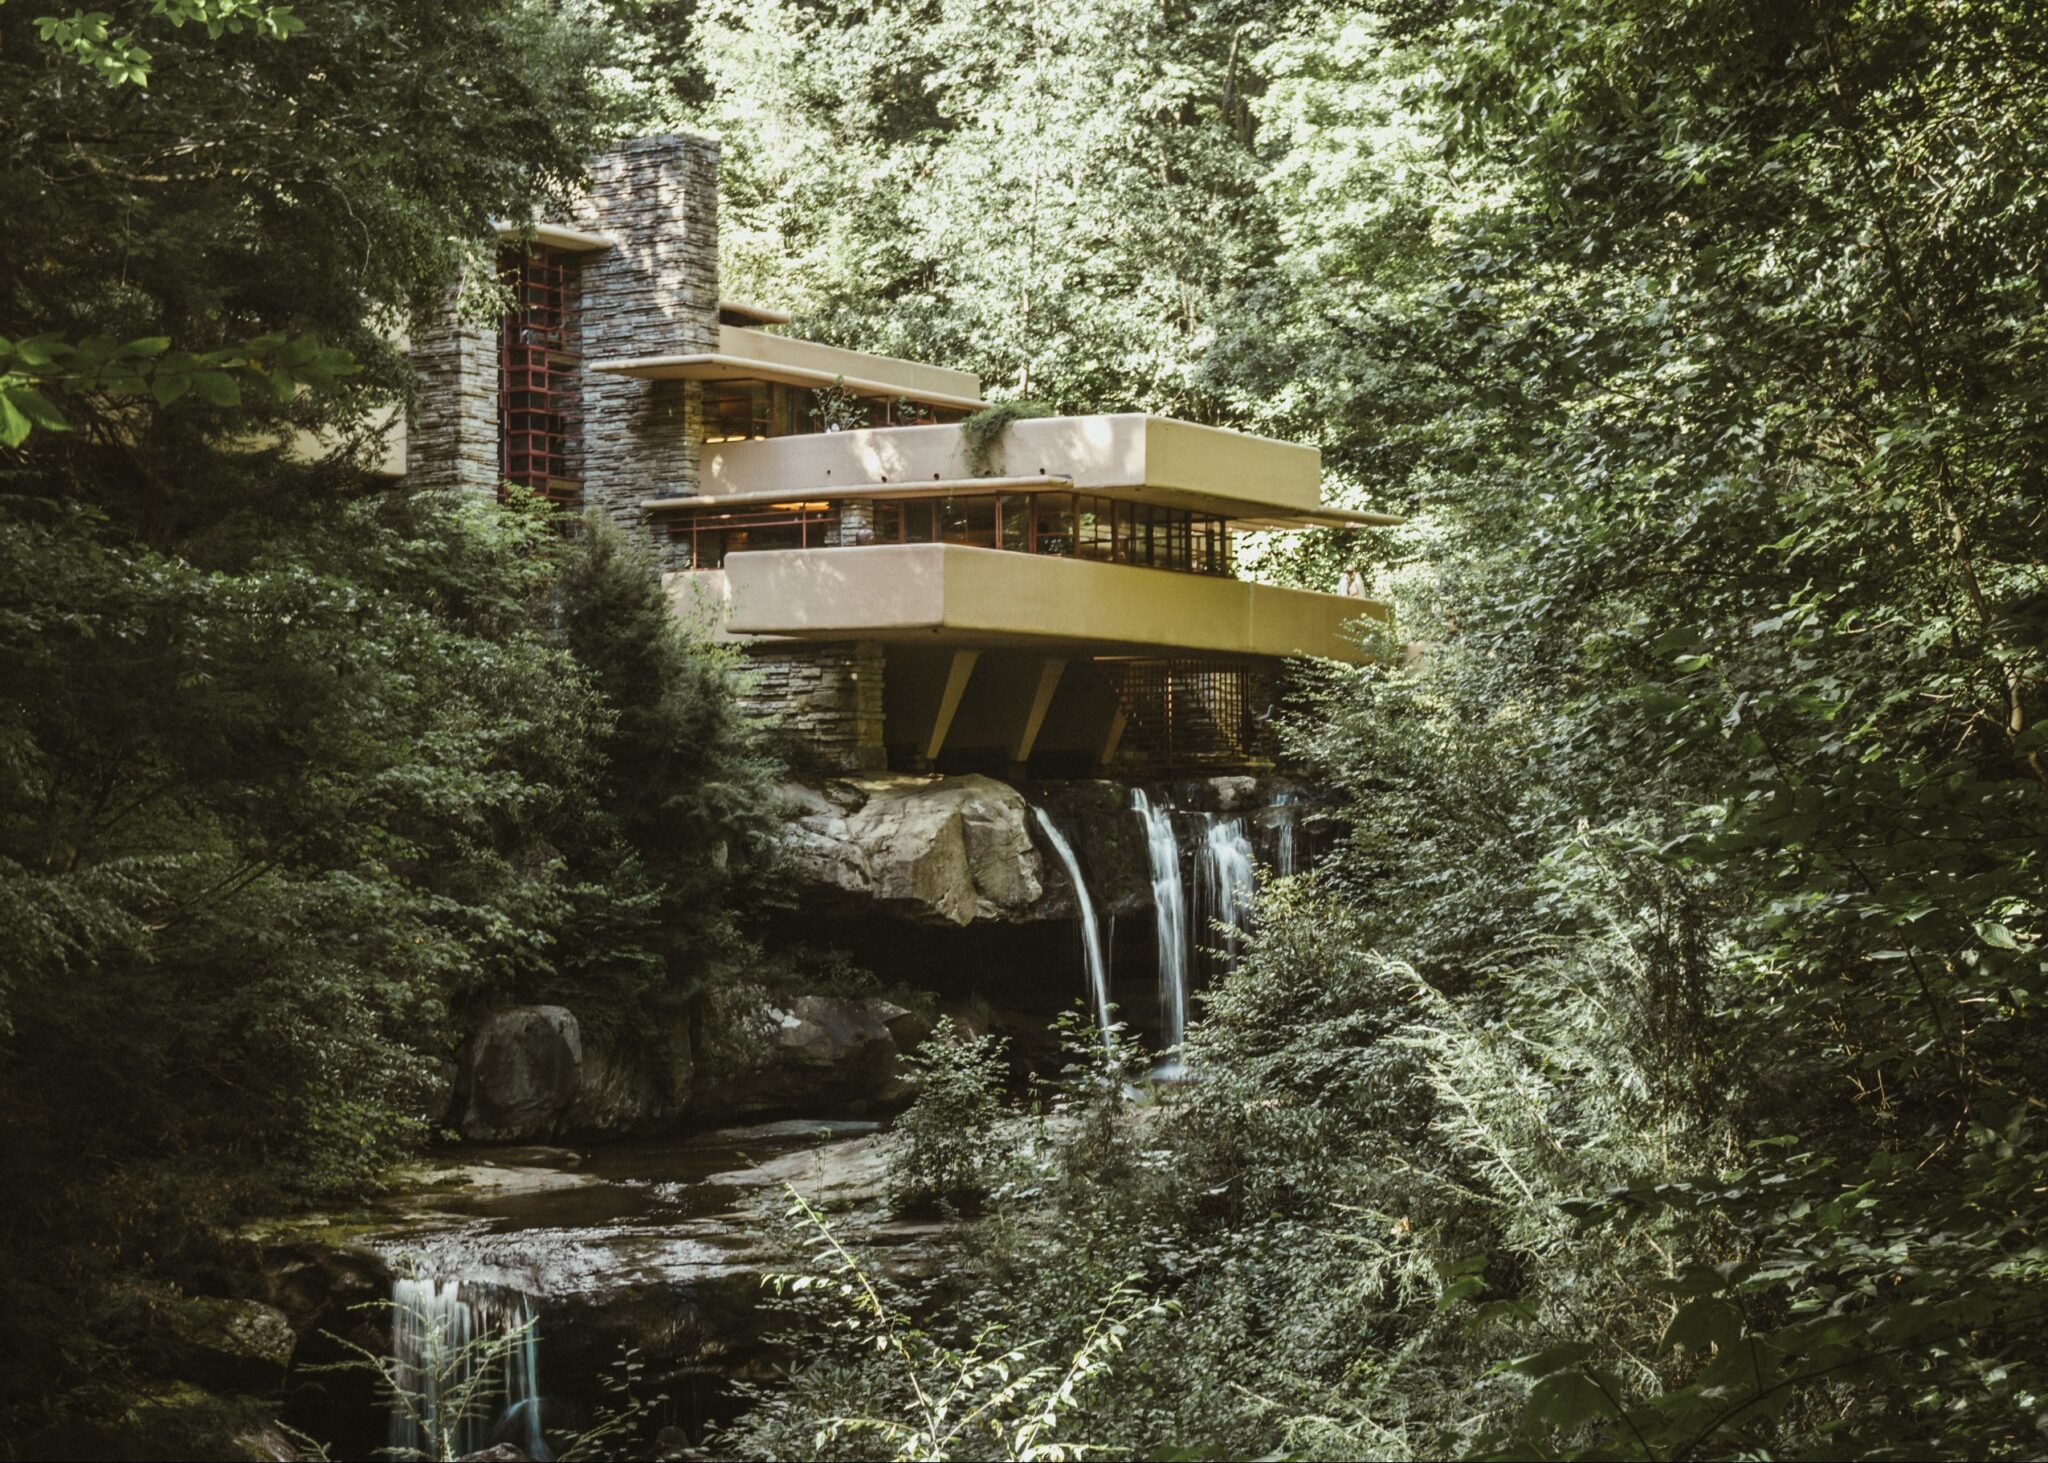 These Are Our Favorite Frank Lloyd Wright Houses Across Americ